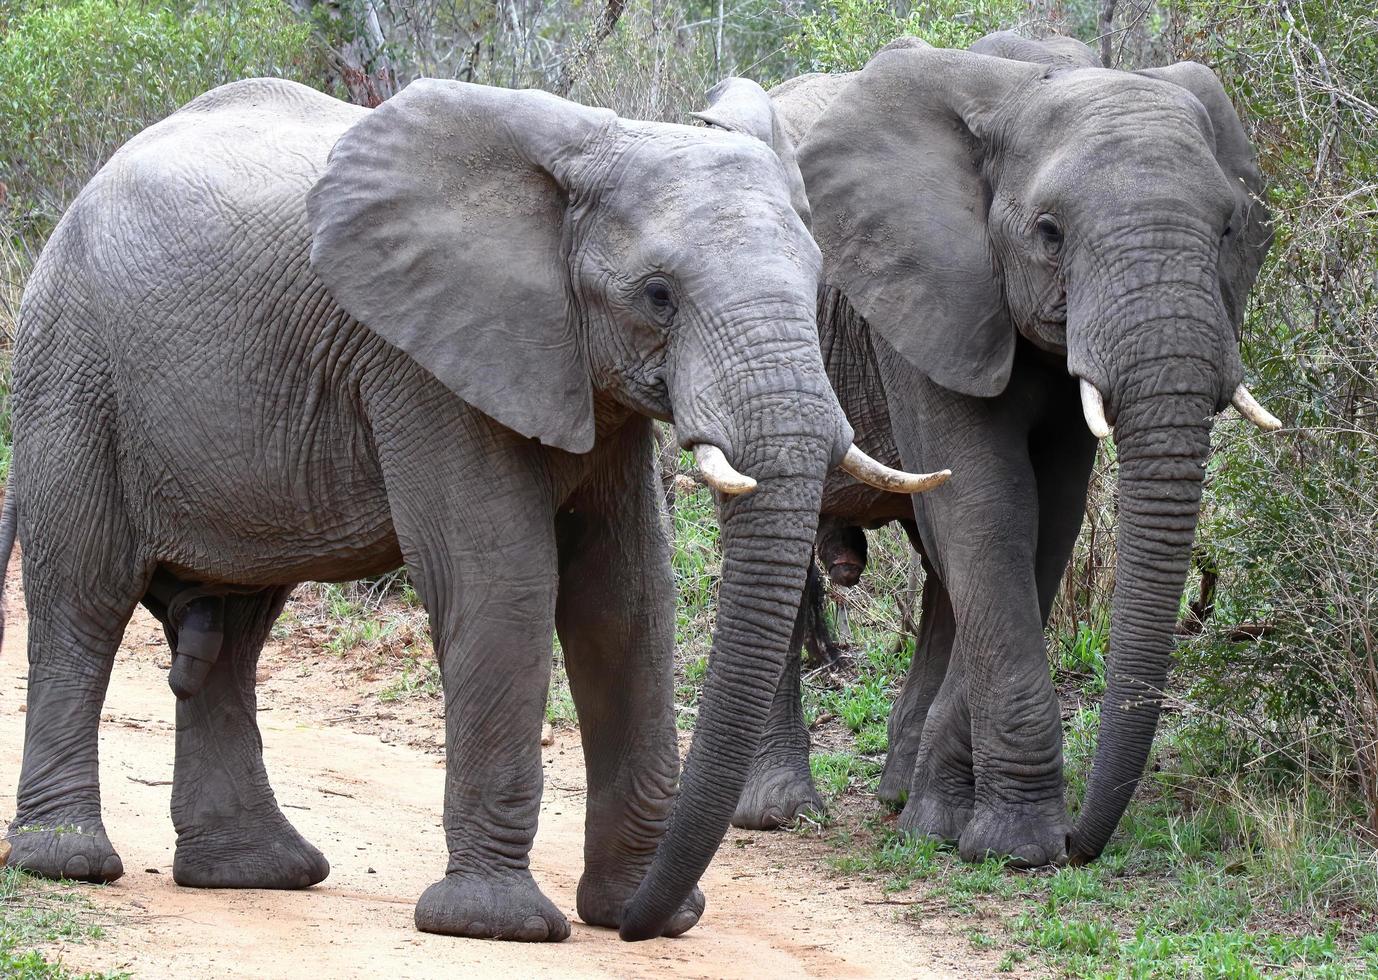 A close-up photo of two male Elephants spotted in the Sabi Sands nature reserve during a game drive.